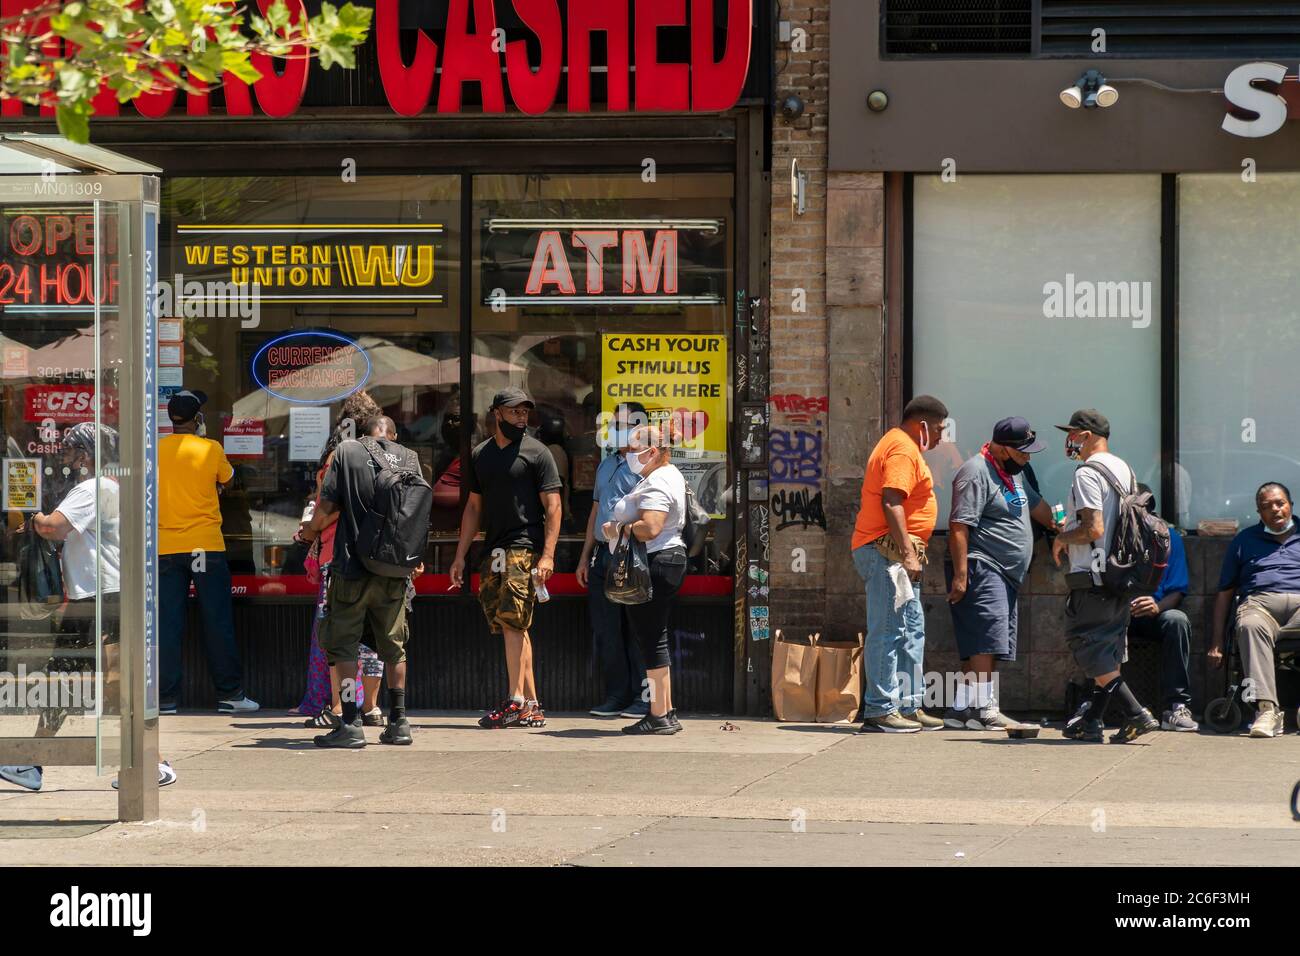 Customers line up outside a check cashing business in Harlem in New York on Saturday, July 4, 2020 that advertises that they cash stimulus checks. (© Richard B. Levine) Stock Photo